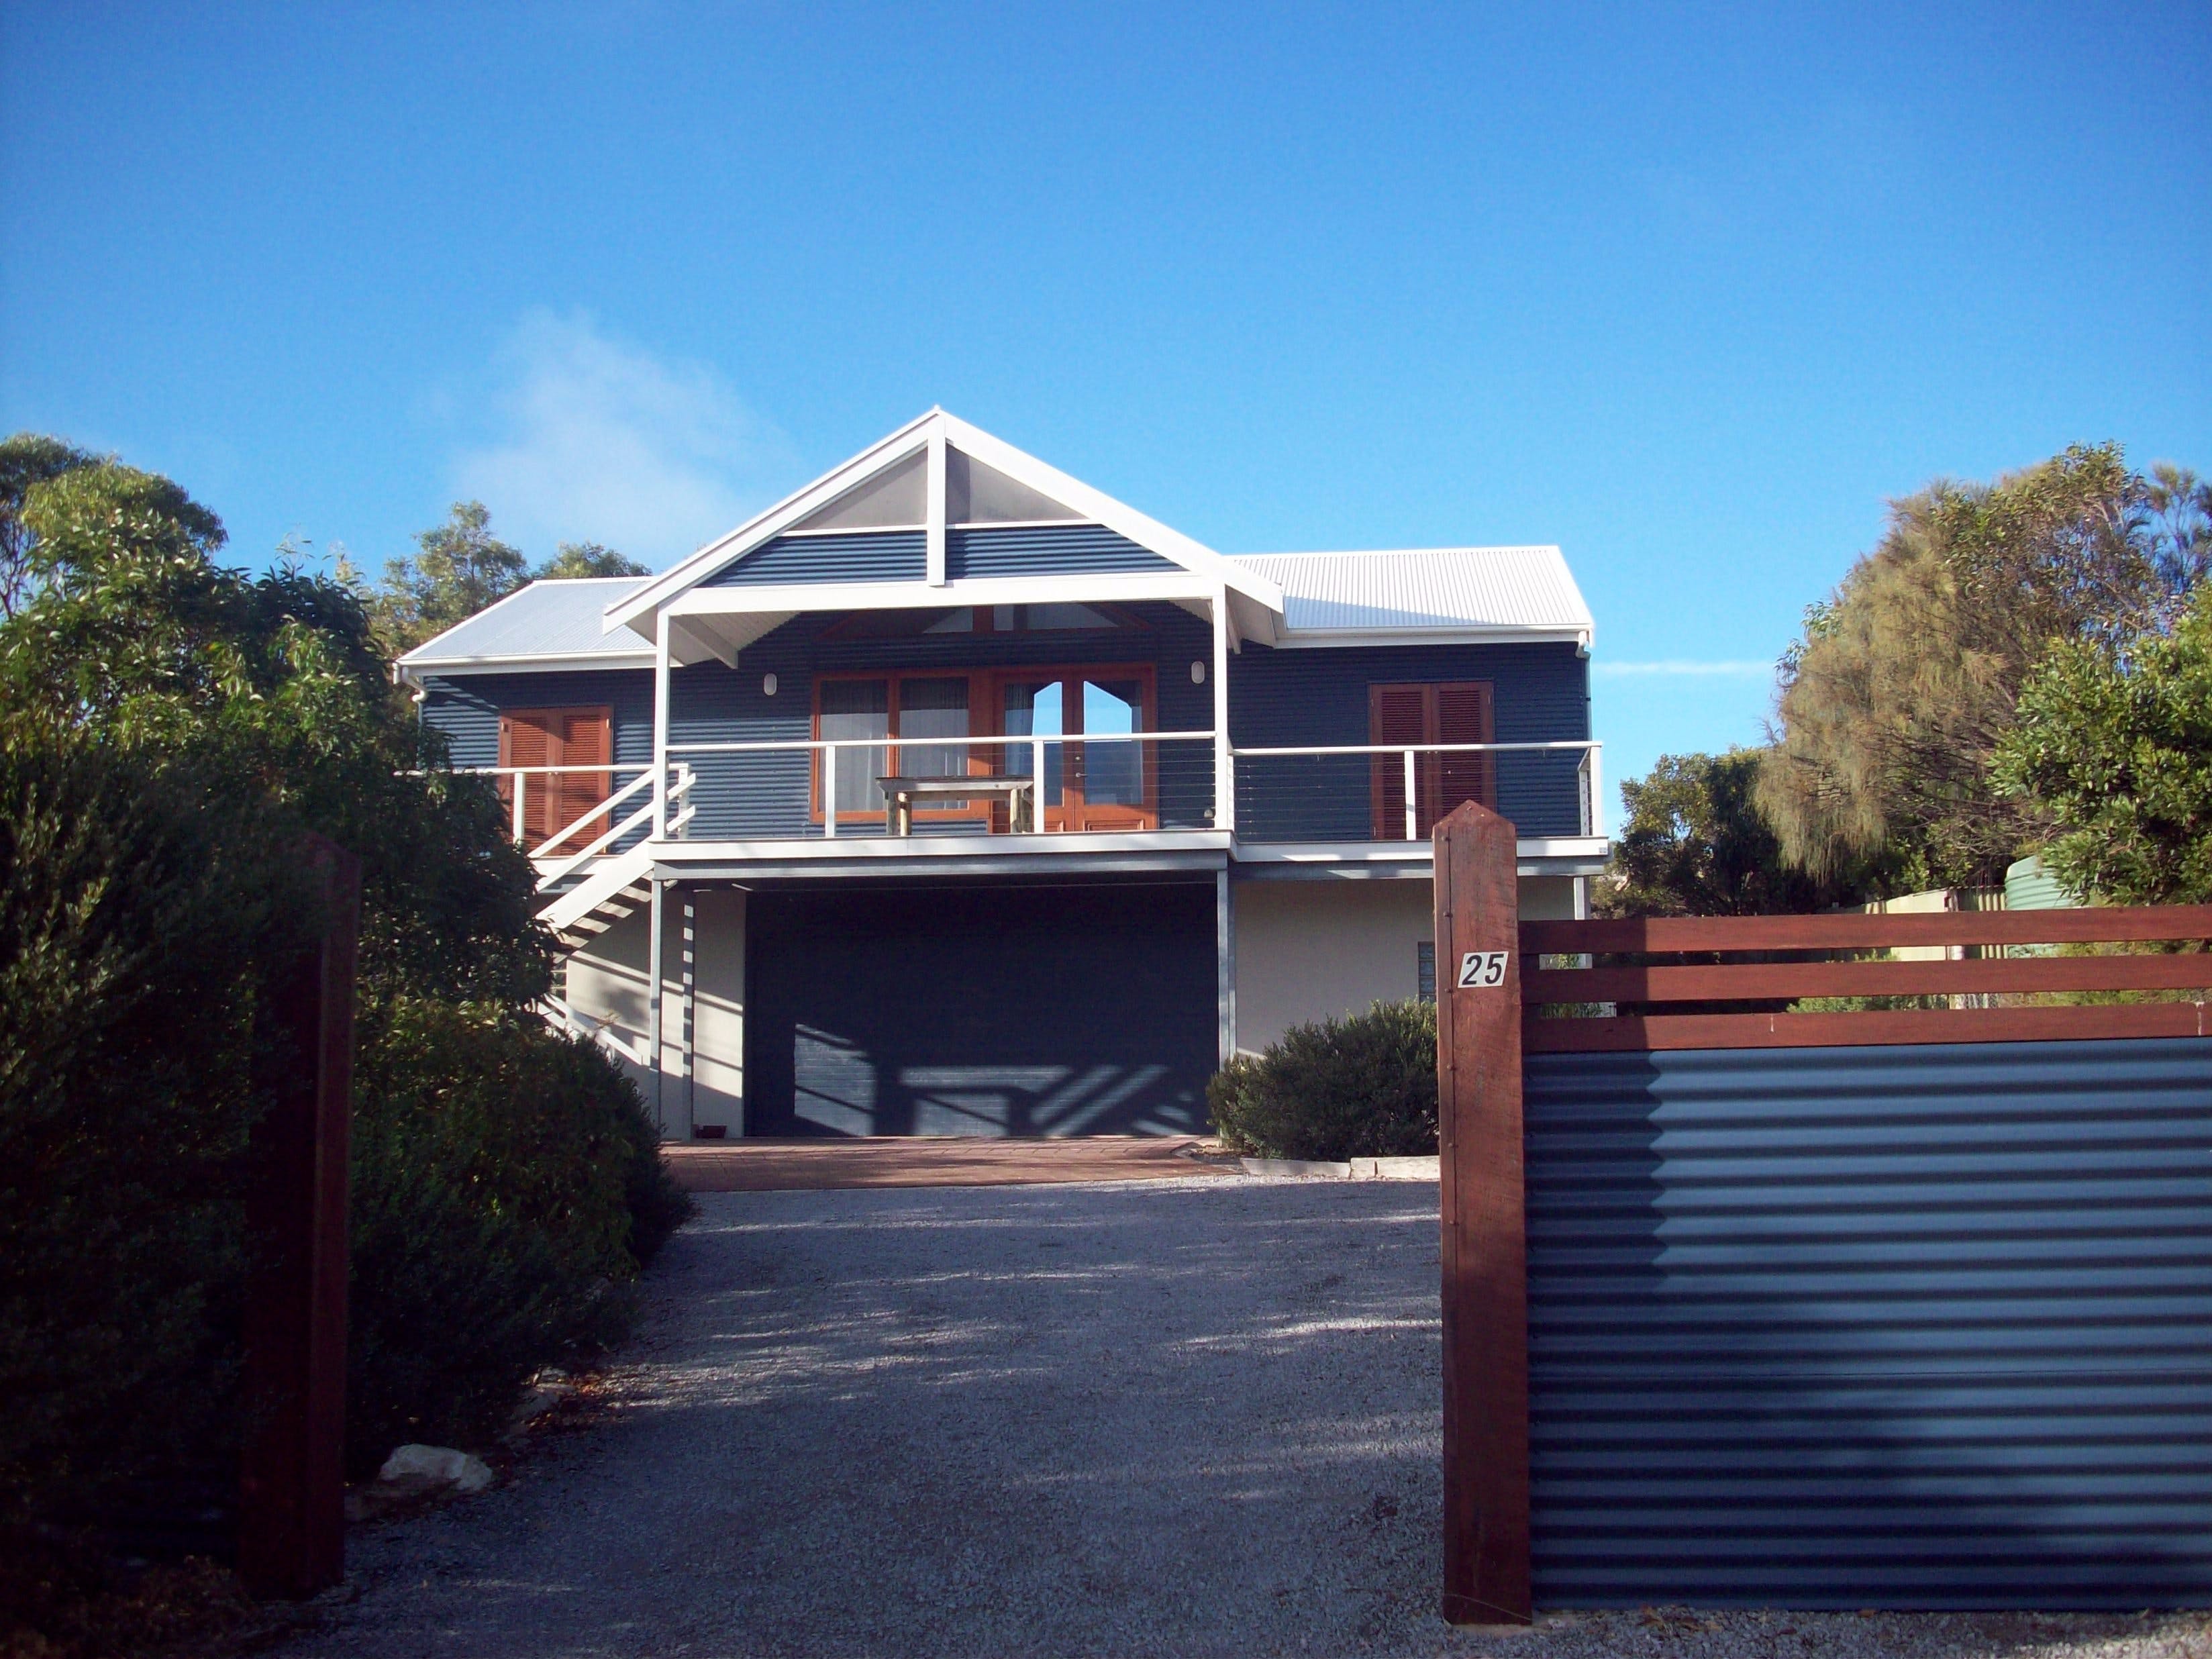 Top Deck Marion Bay - Nambucca Heads Accommodation